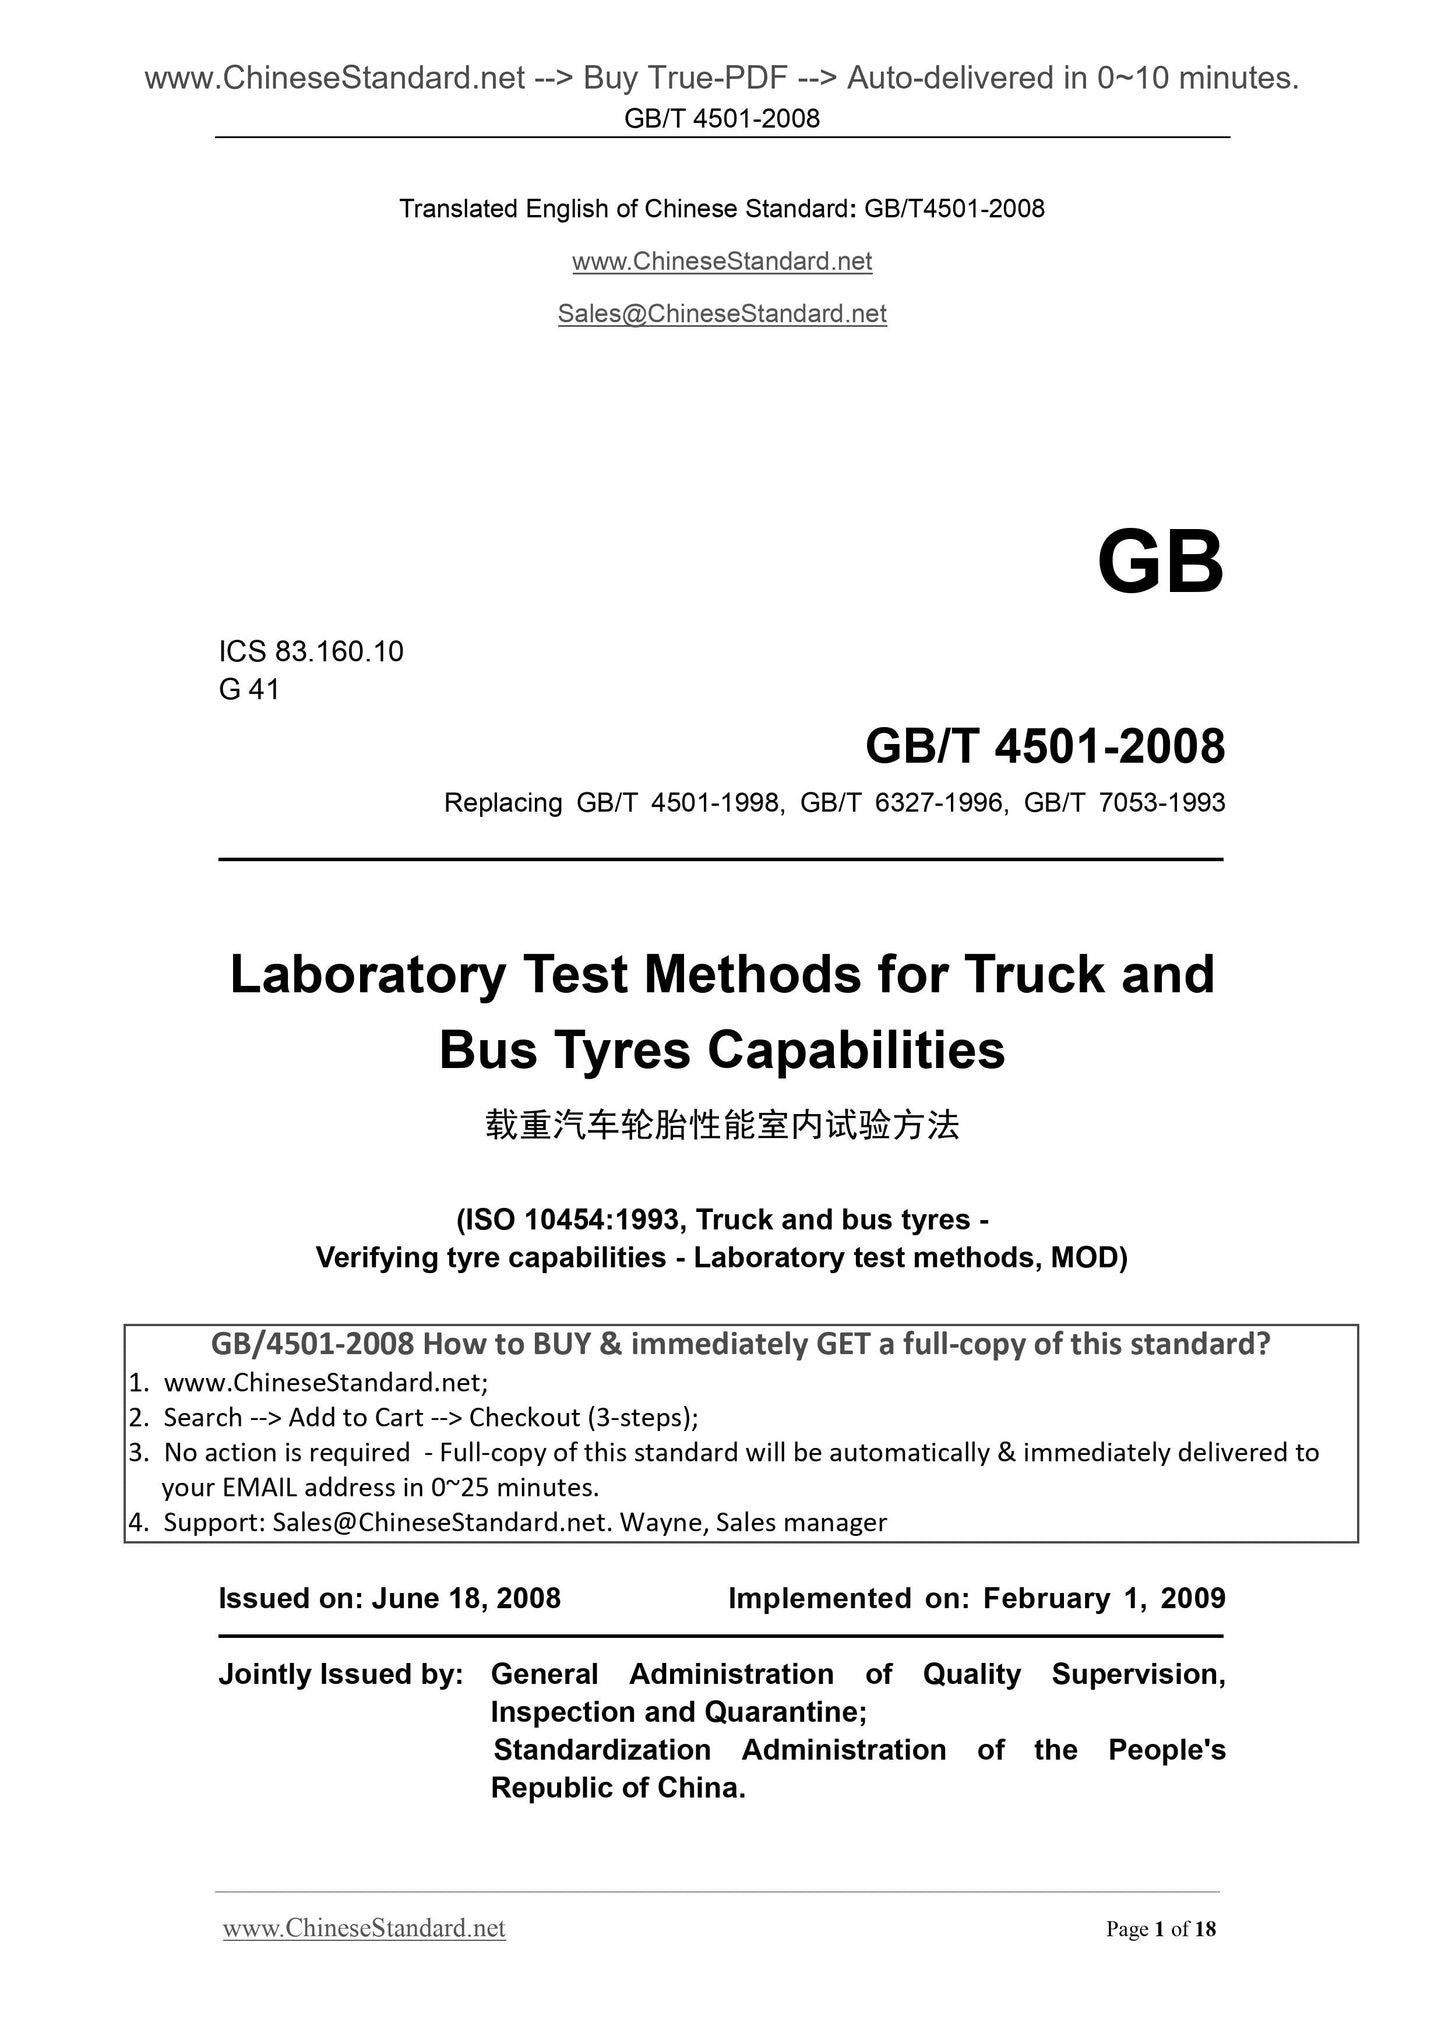 GB/T 4501-2008 Page 1